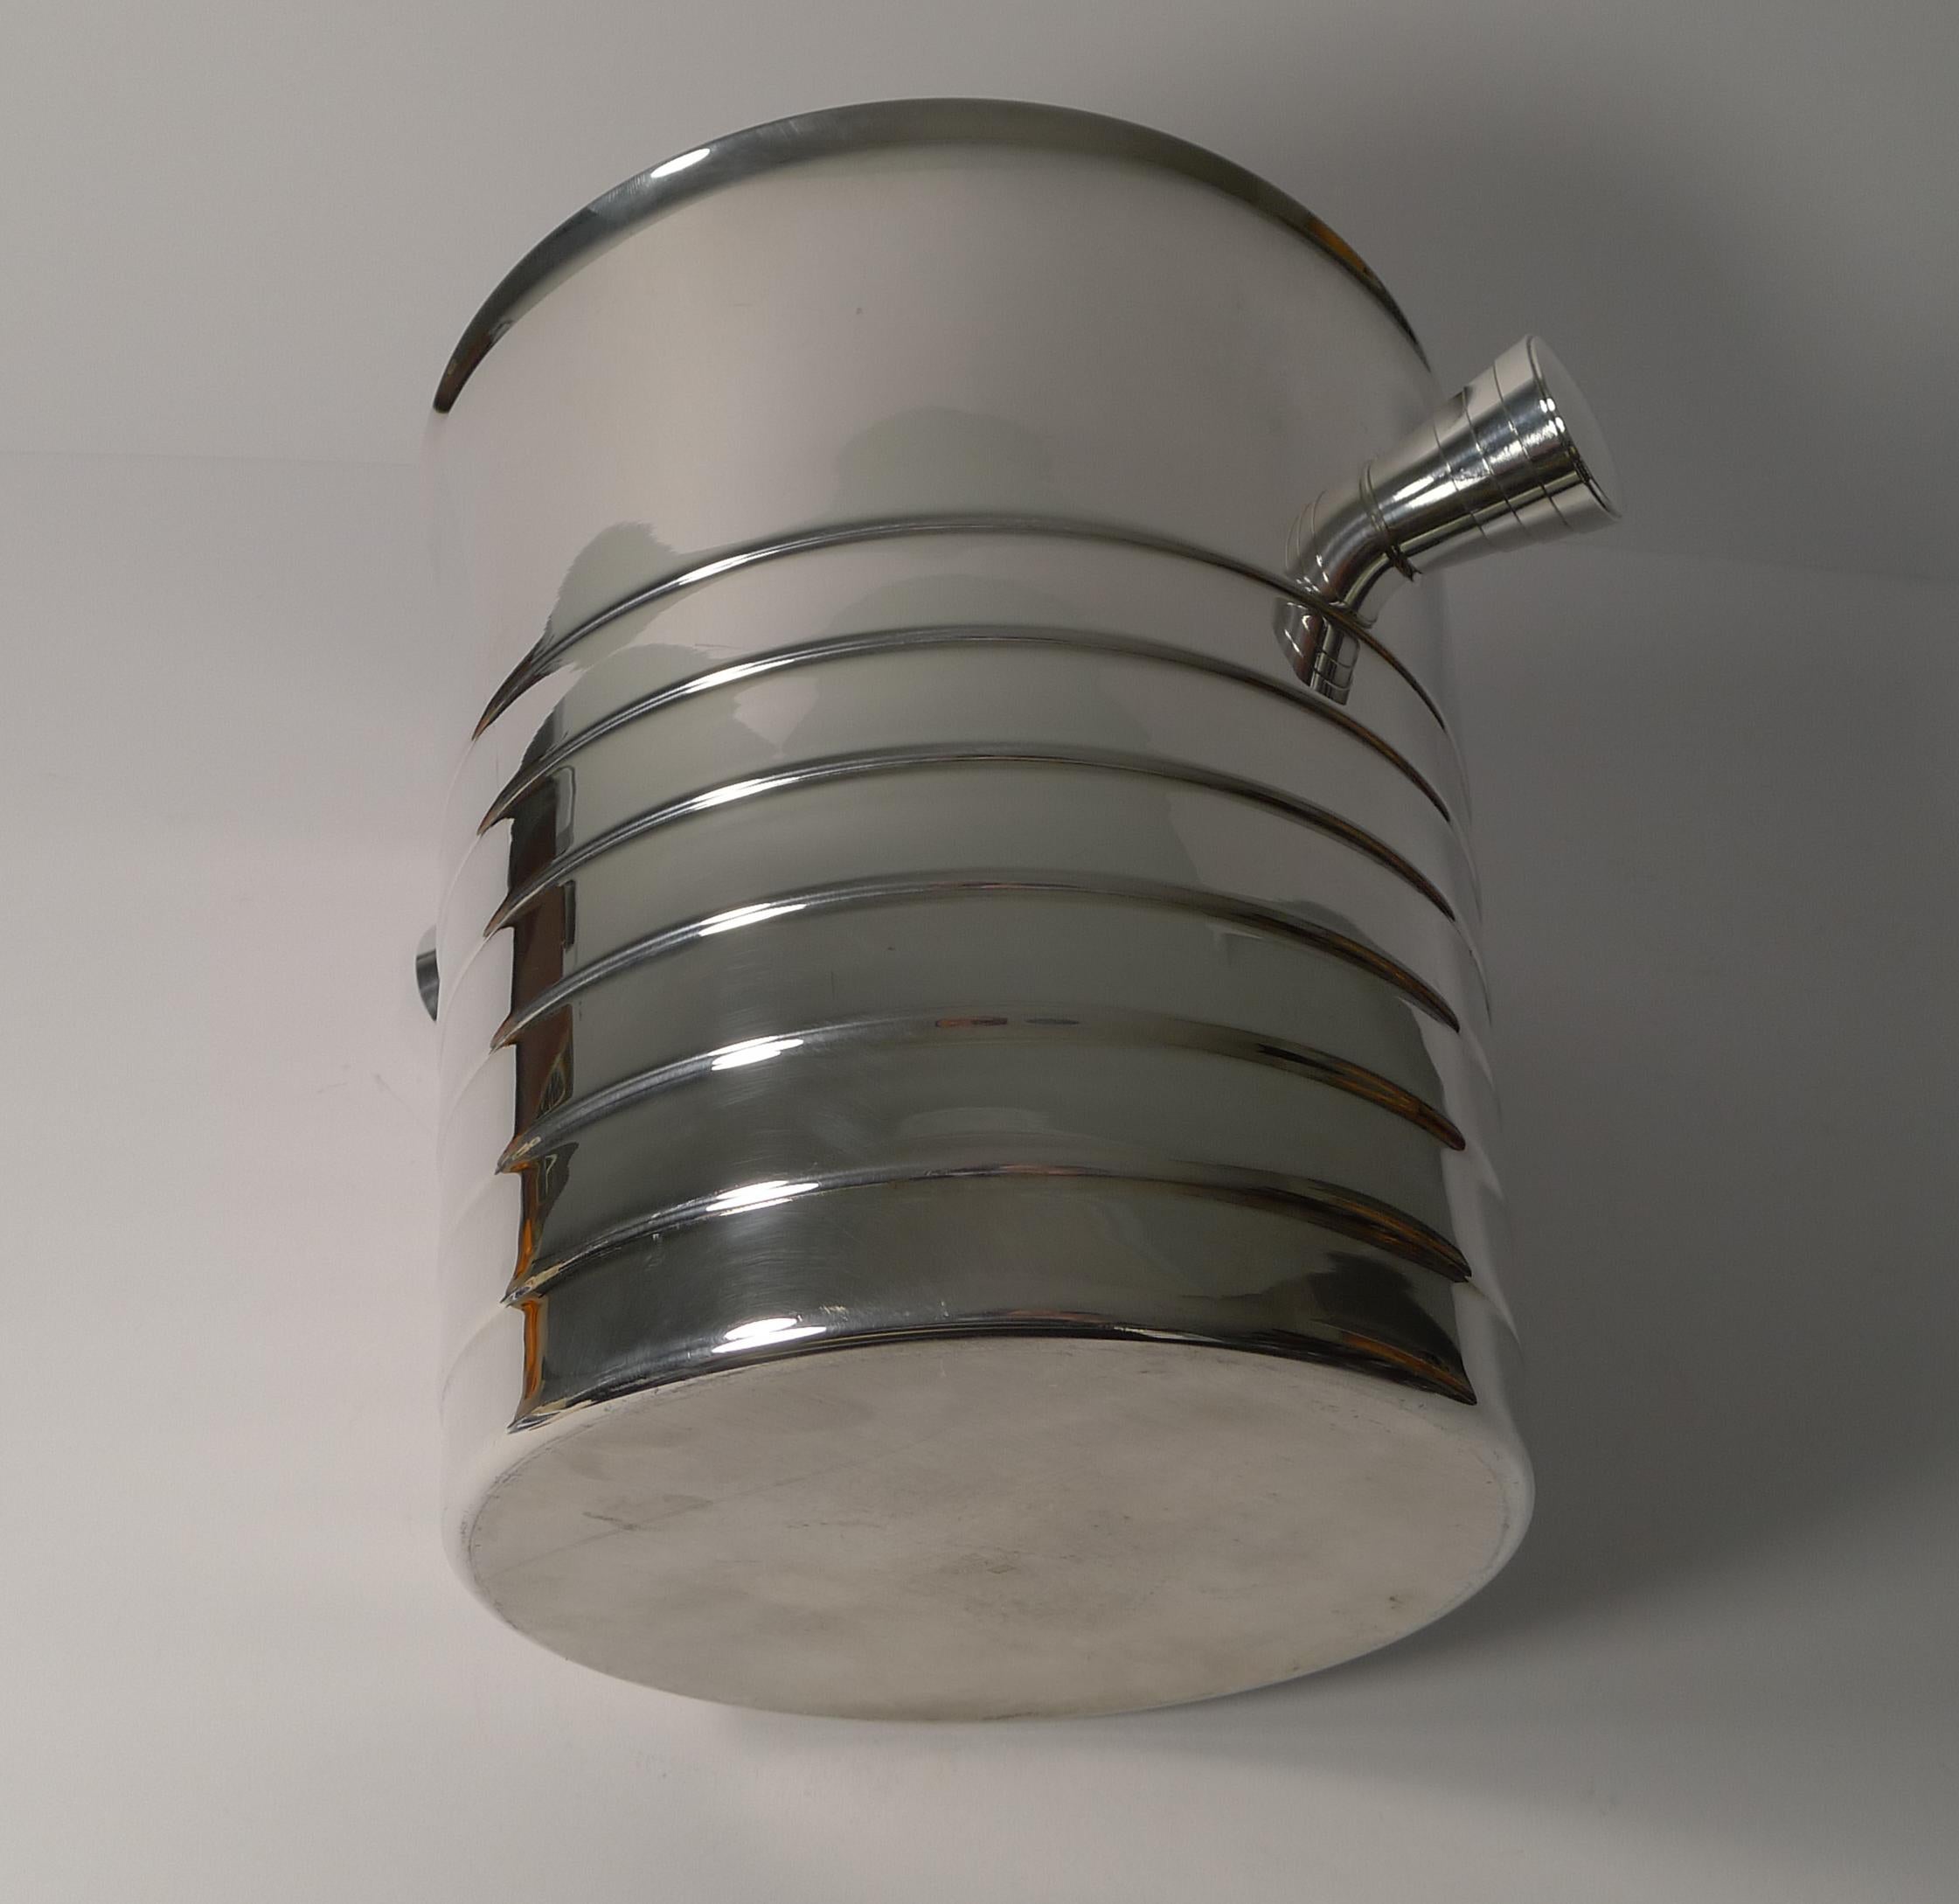 Silver Plate Folio Champagne Bucket or Wine Cooler by Maison Christofle, Paris